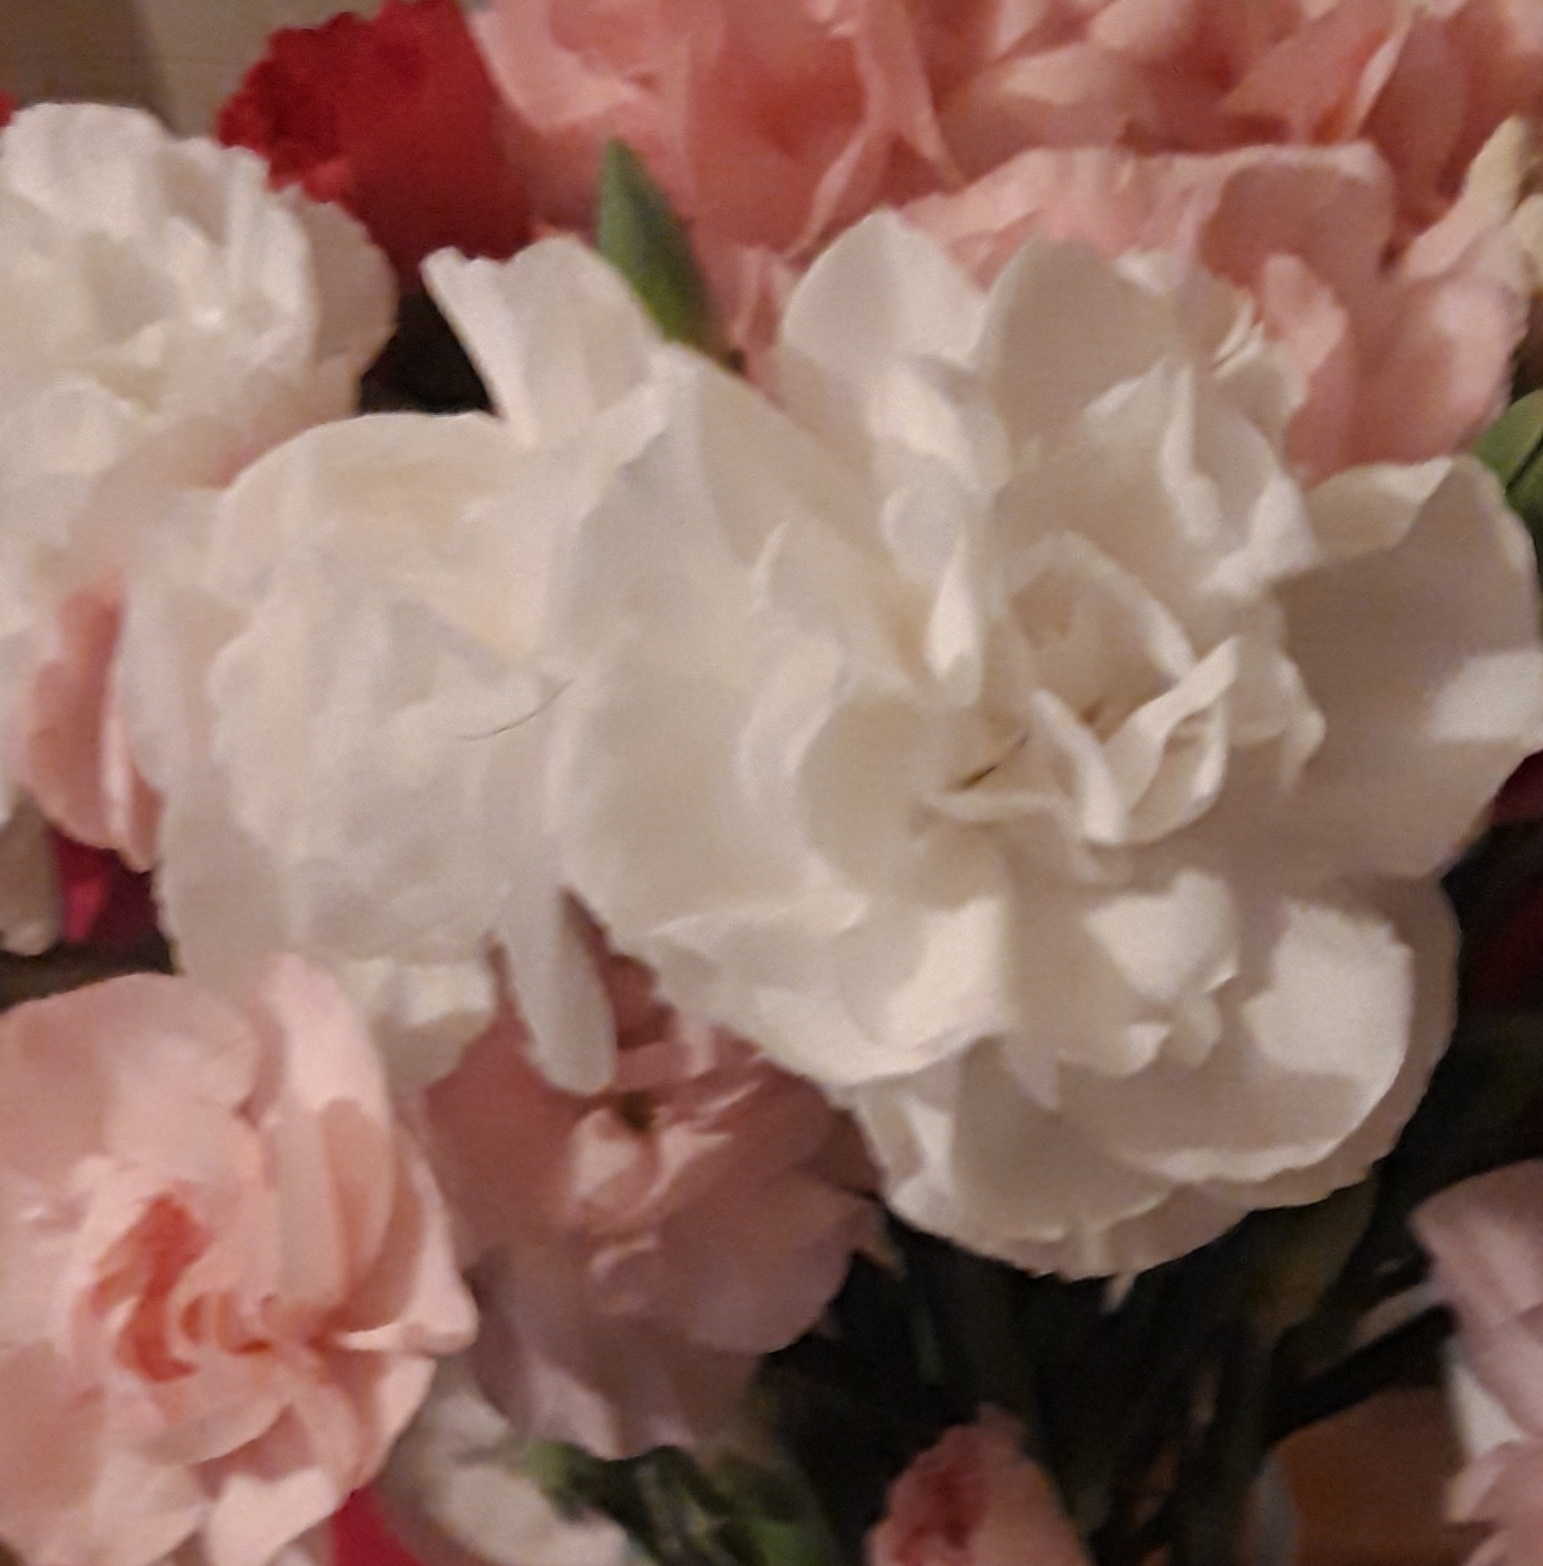 Pink and white carnation flowers